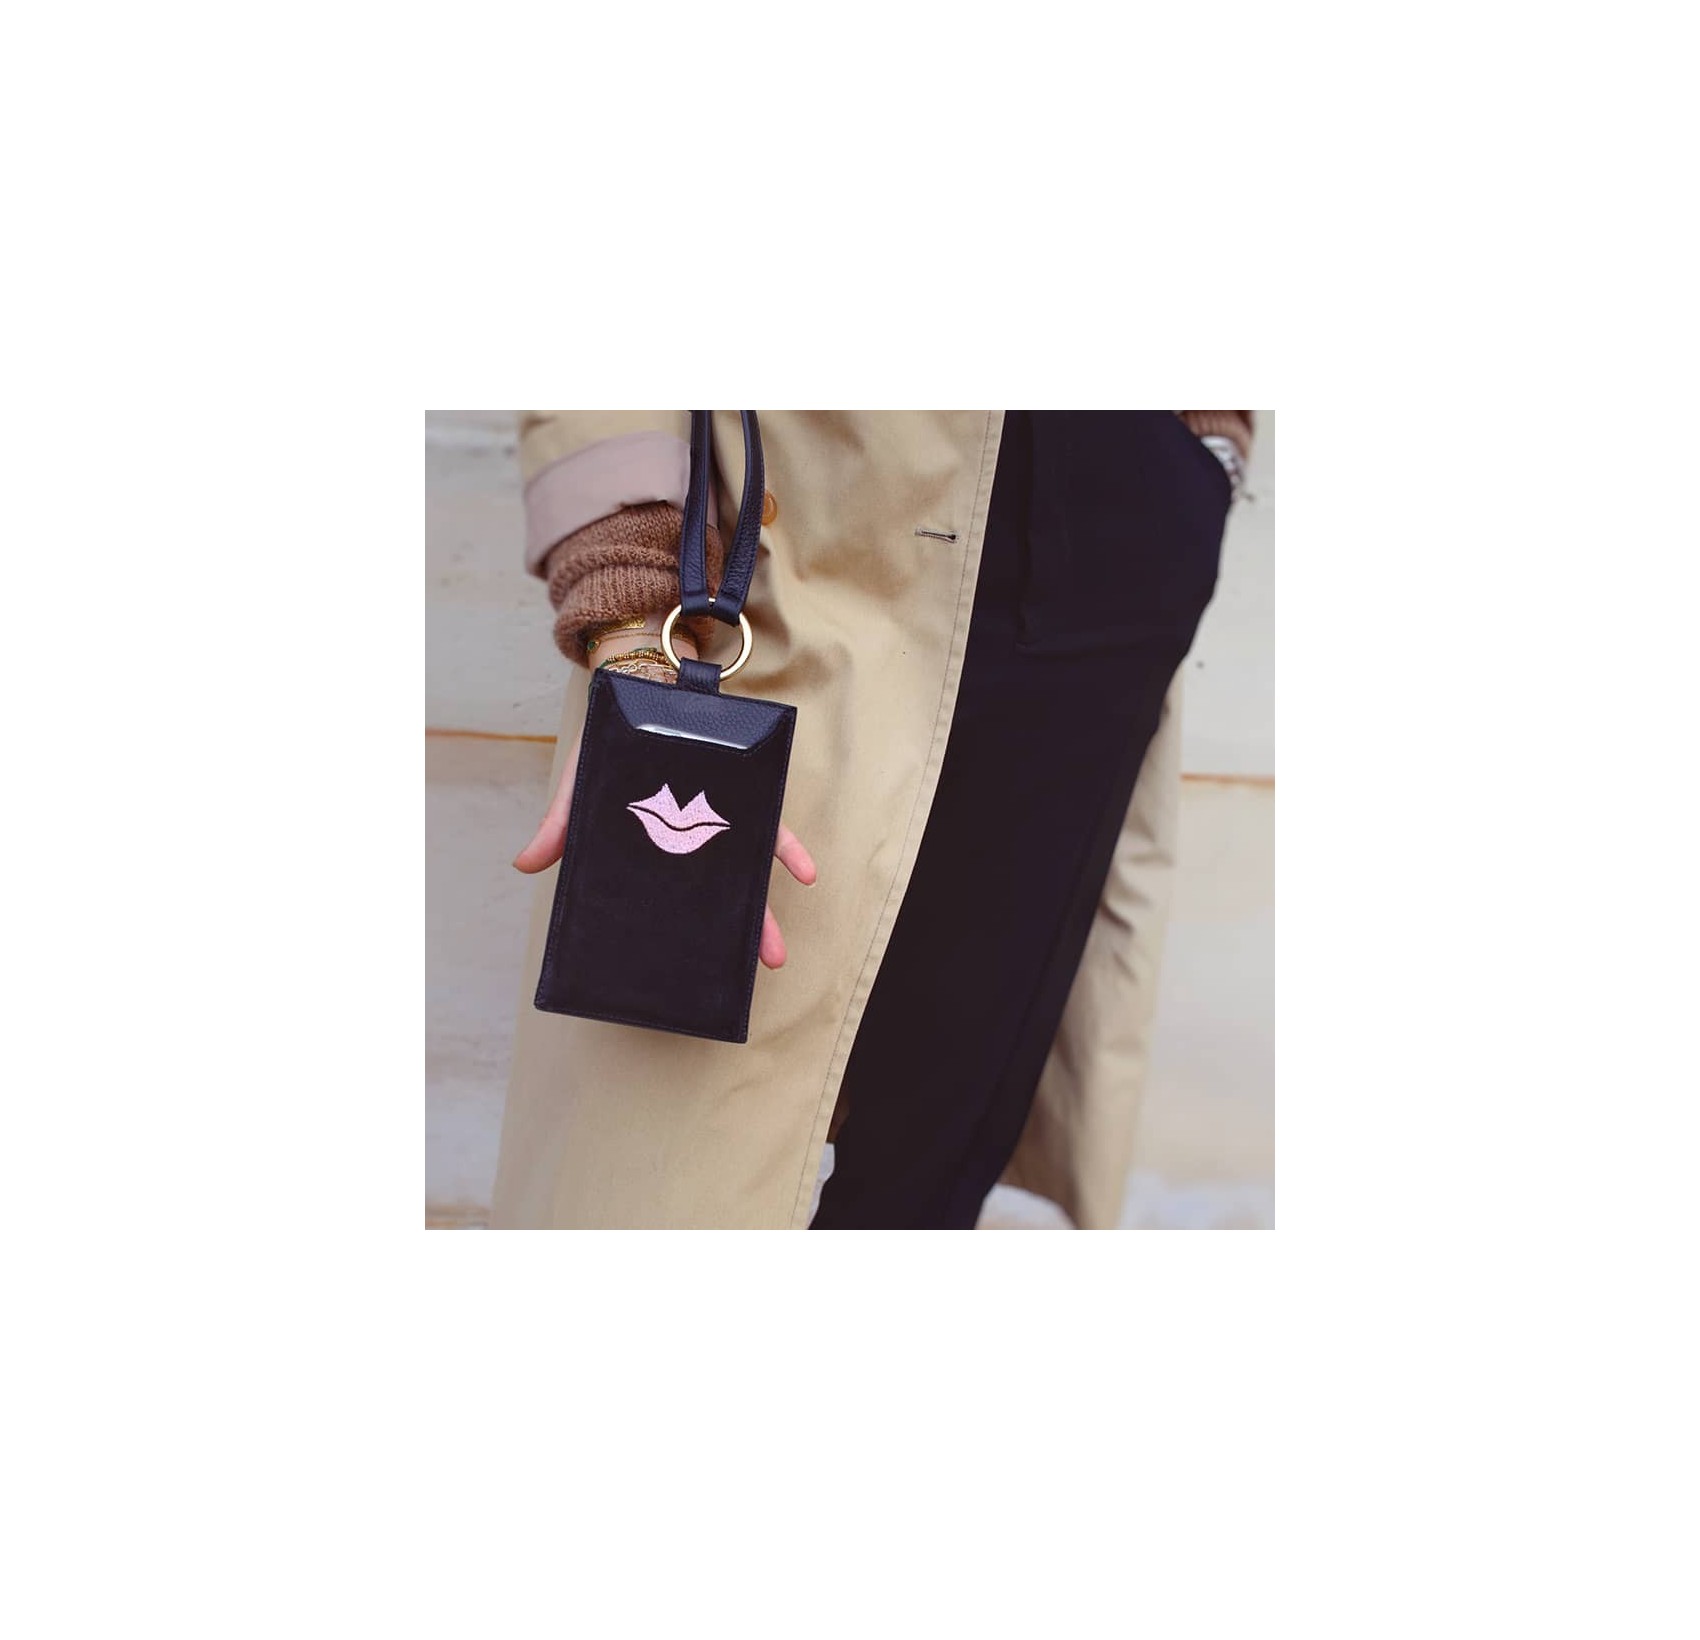 Black and pink velvet leather TELI phone pouch, Look 1 view | Gloria Balensi